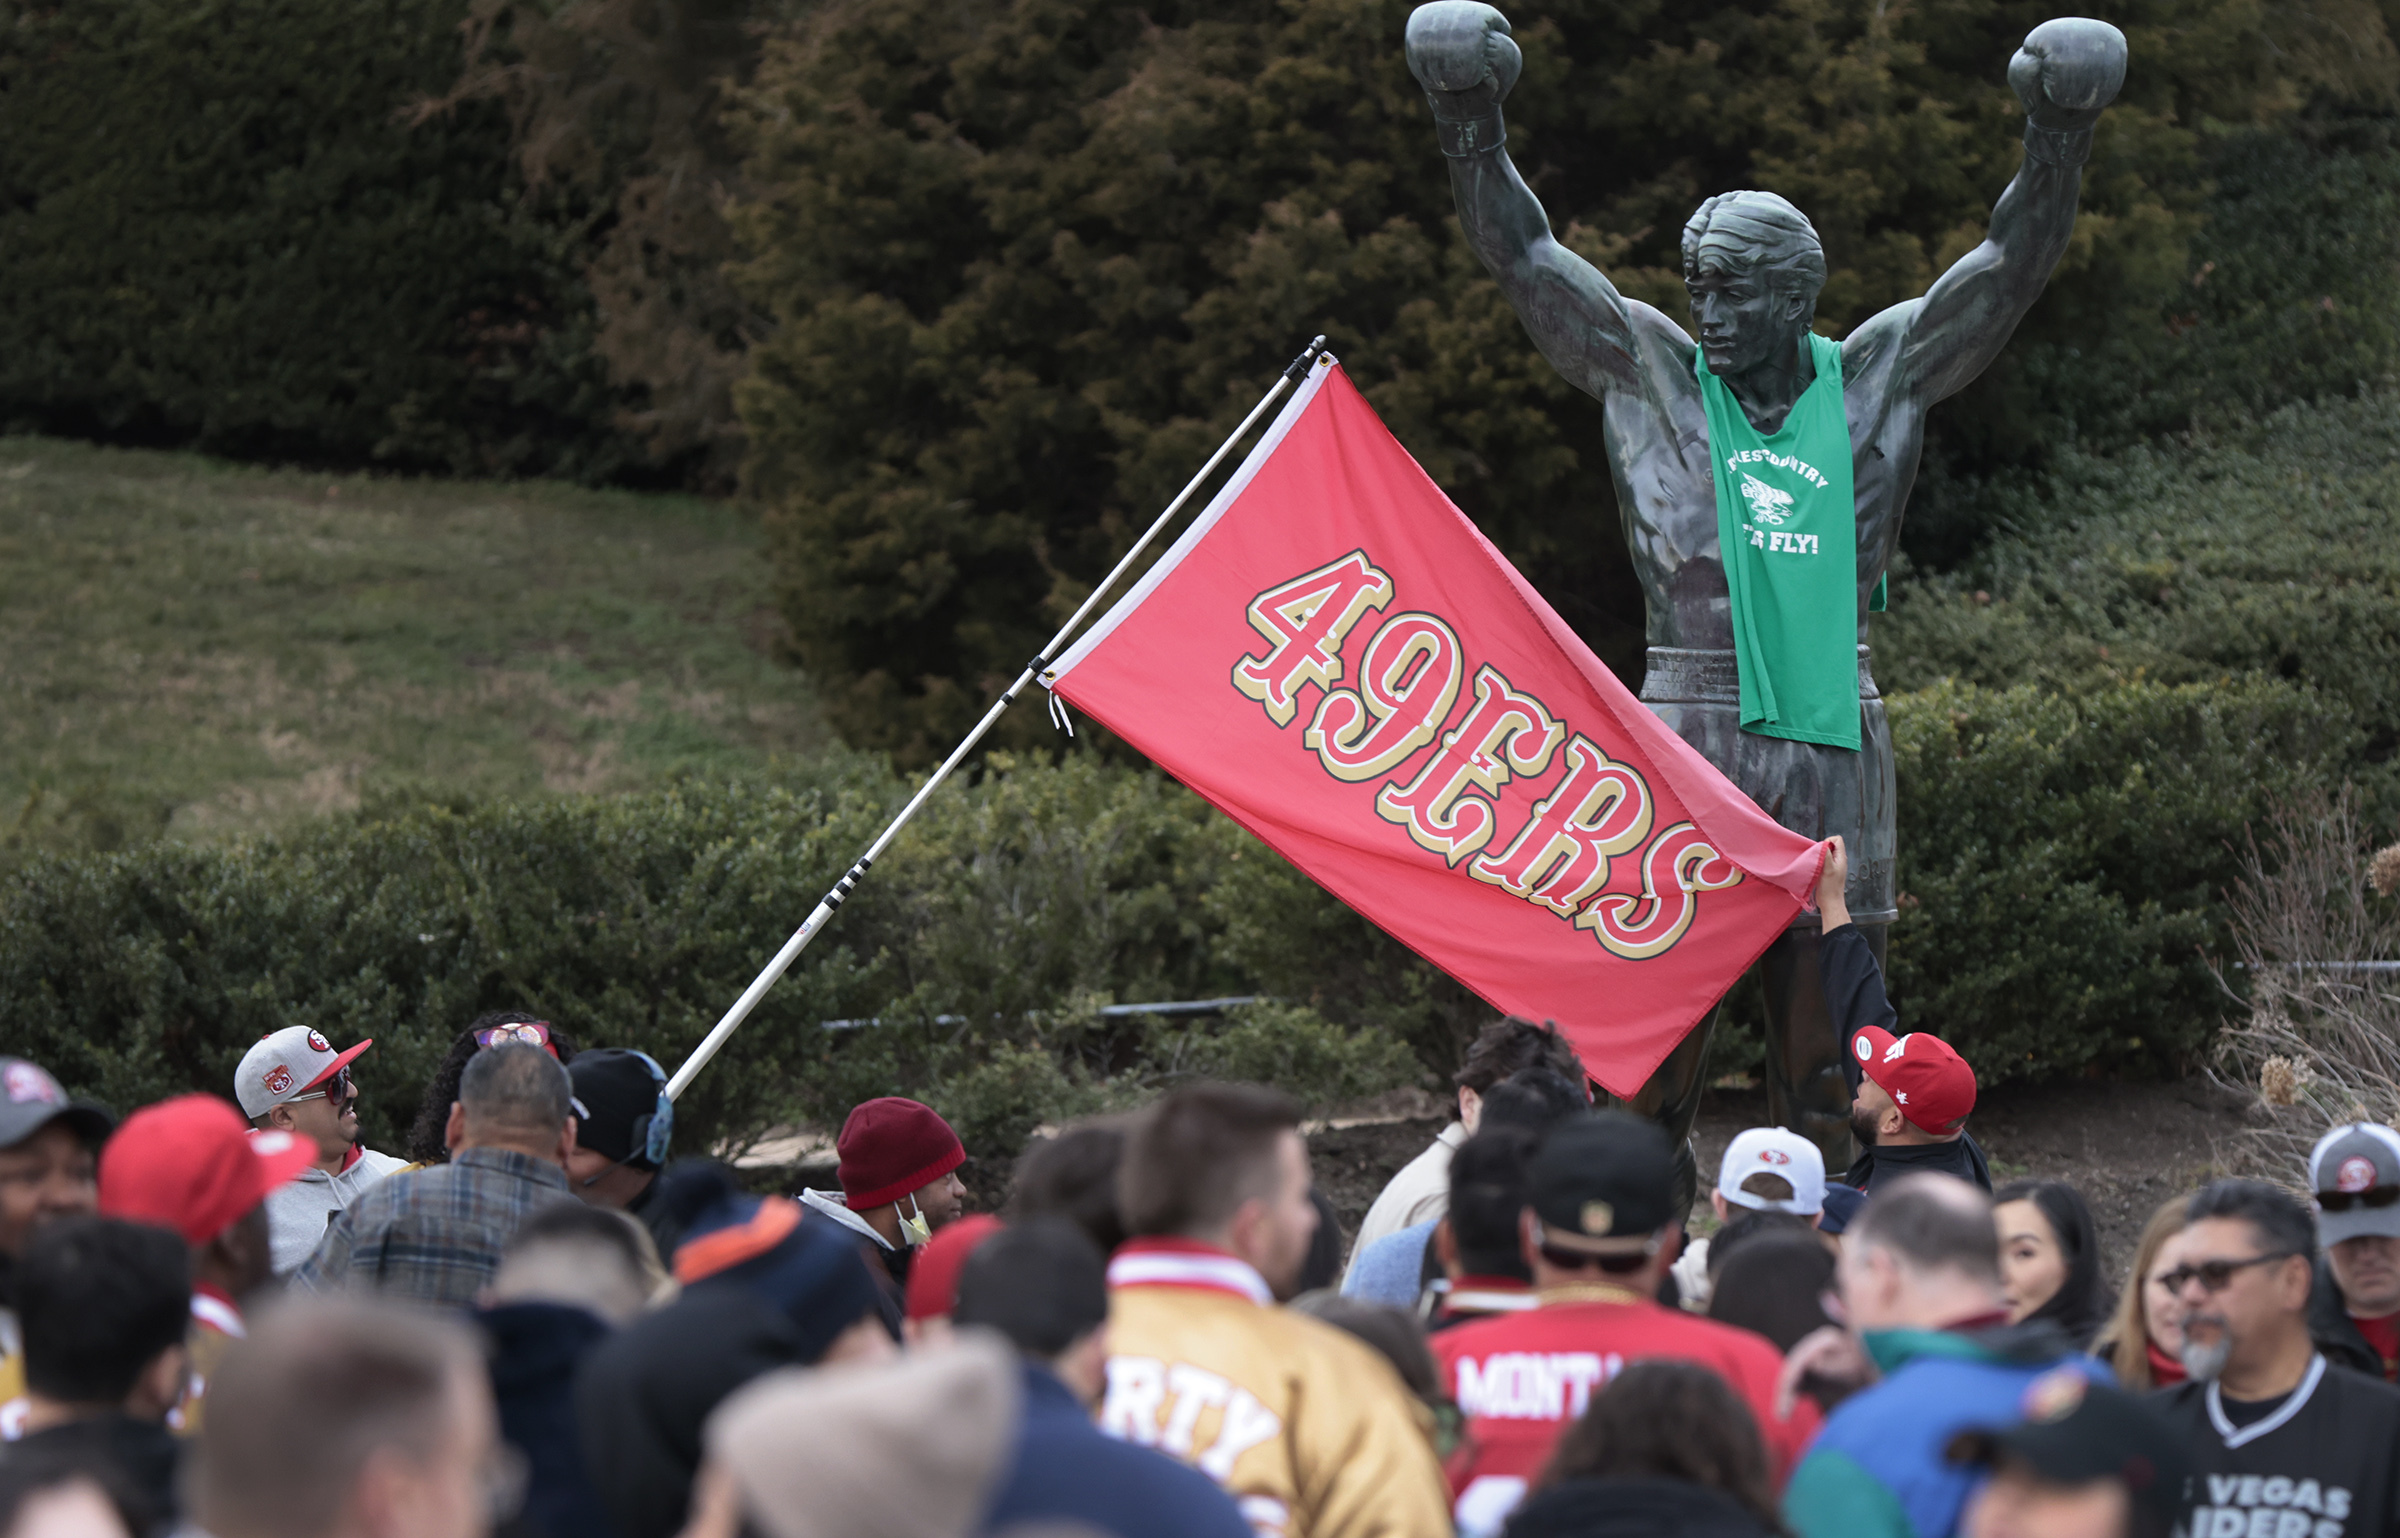 49ers fans and #Eagles fans are battling over the #Rocky statue rn 